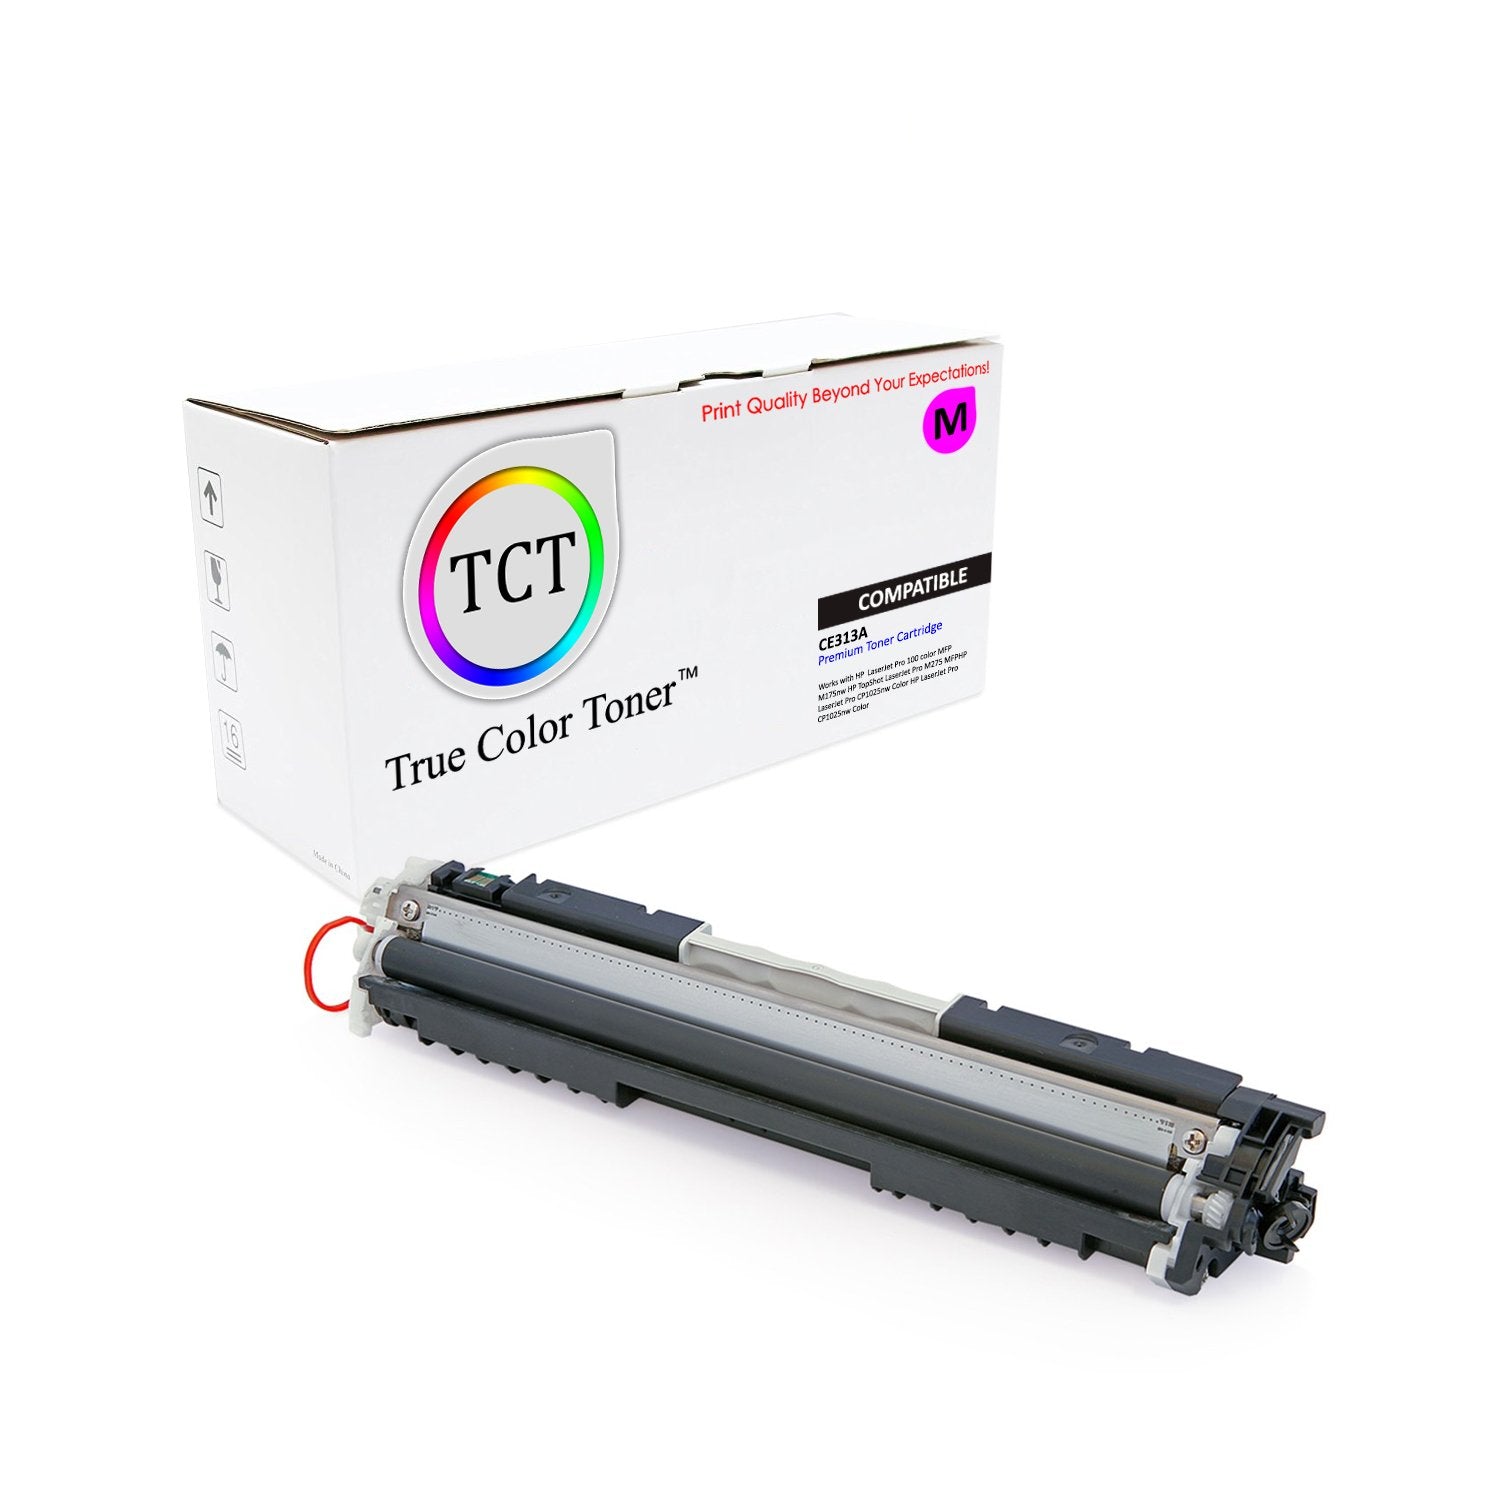 TCT Compatible Toner Cartridge Replacement for the HP 126A Series - 1 Pack Magenta